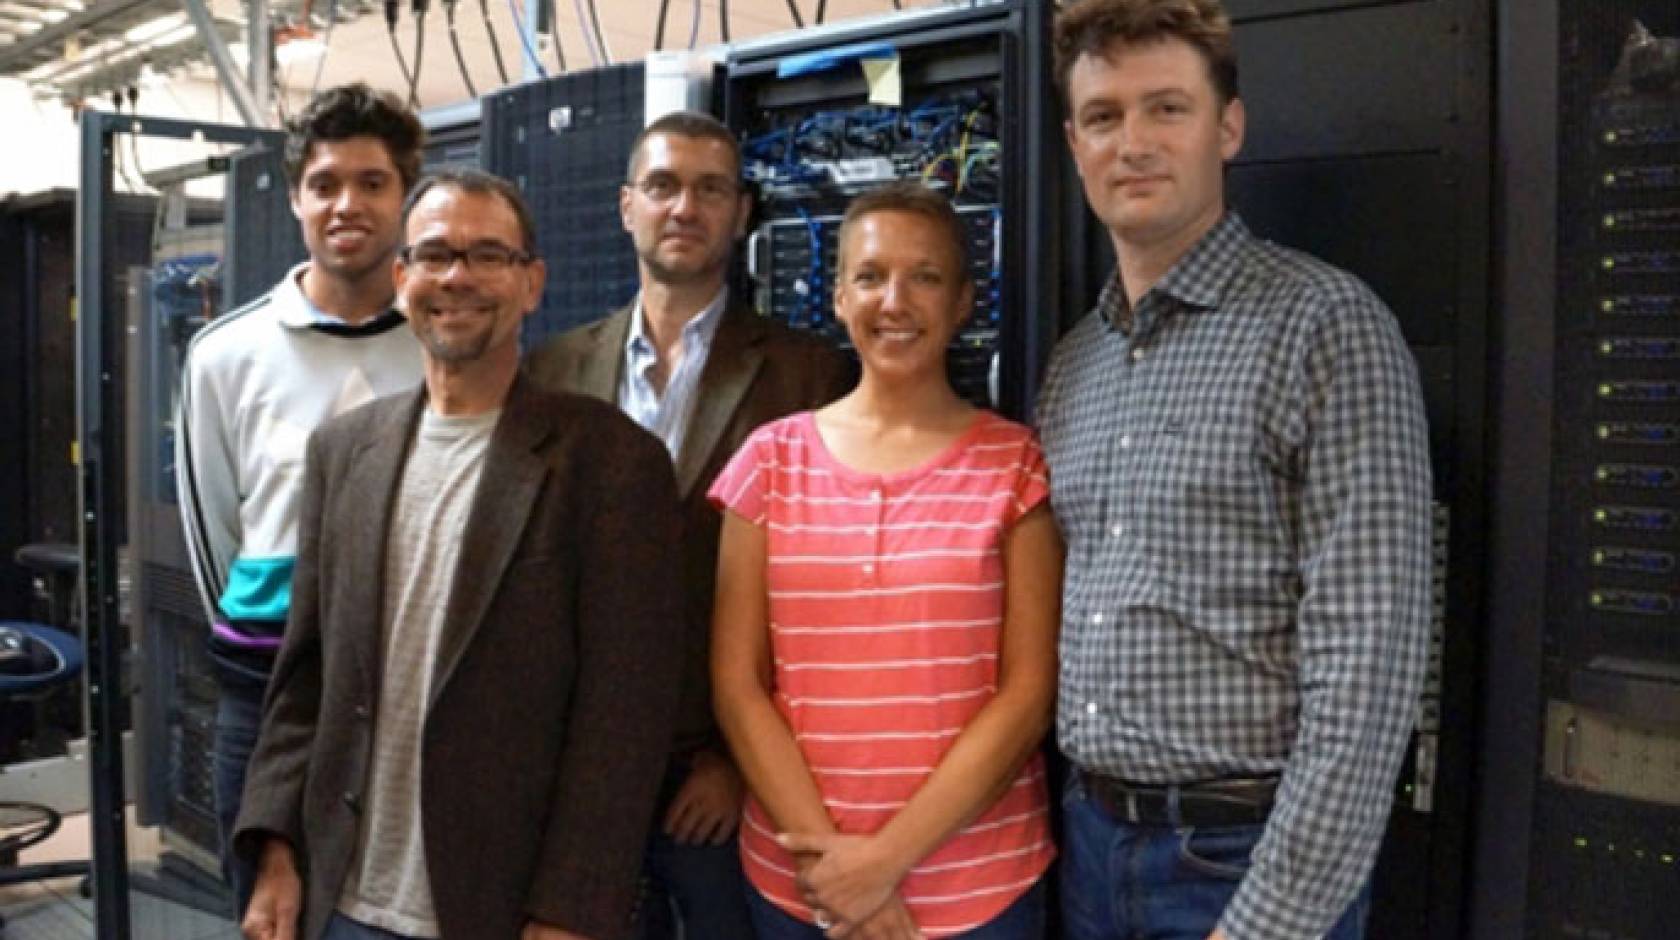 Some of the researchers invoved in the project are (l to r) Jason Worden (PowWow Energy); Rich Wolski (UCSB Department of Computer Science); Roland Geyer, (UCSB Bren School of Environmental Science &amp; Management); Chandra Krintz (UCSB Department of Compute